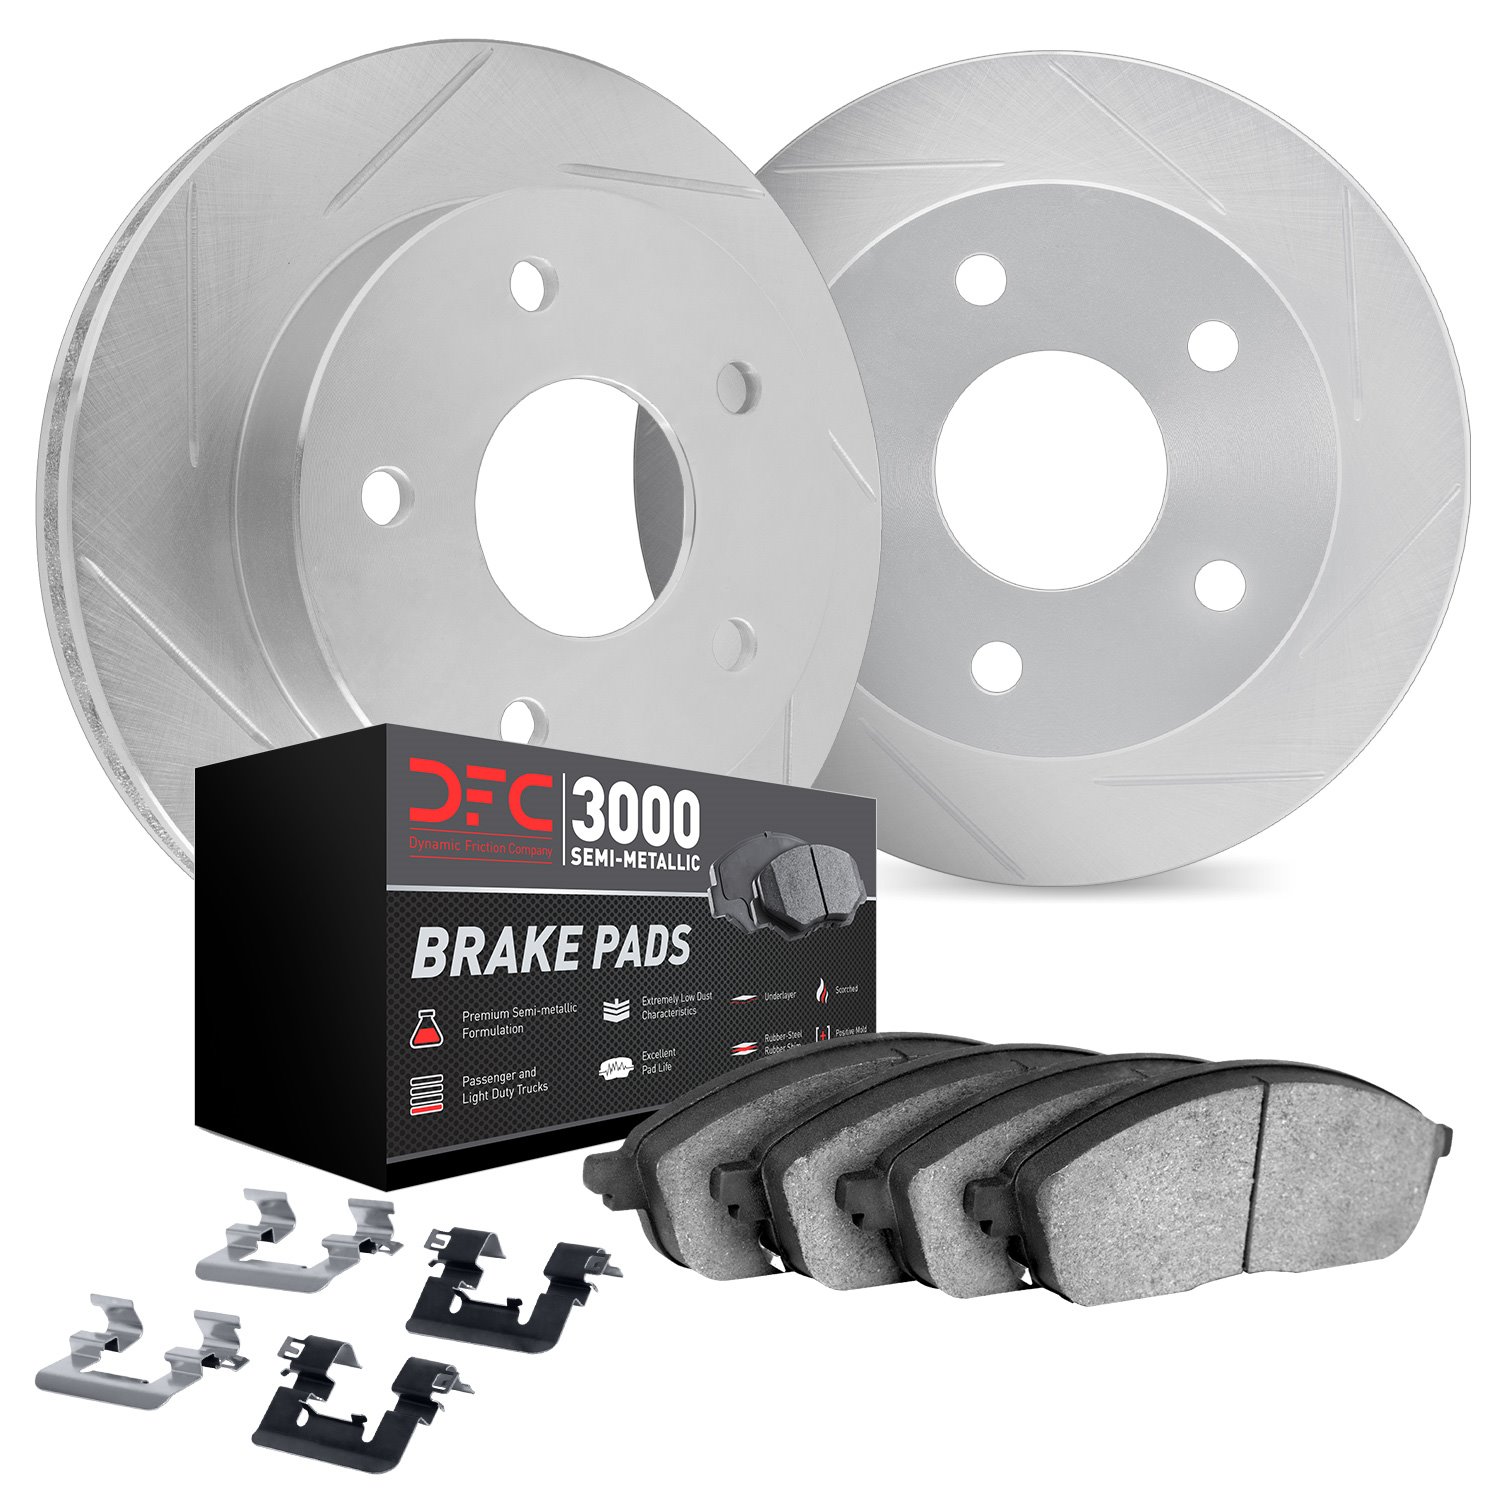 5112-31120 Slotted Brake Rotors with 3000-Series Semi-Metallic Brake Pads Kit & Hardware [Silver], Fits Select BMW, Position: Re